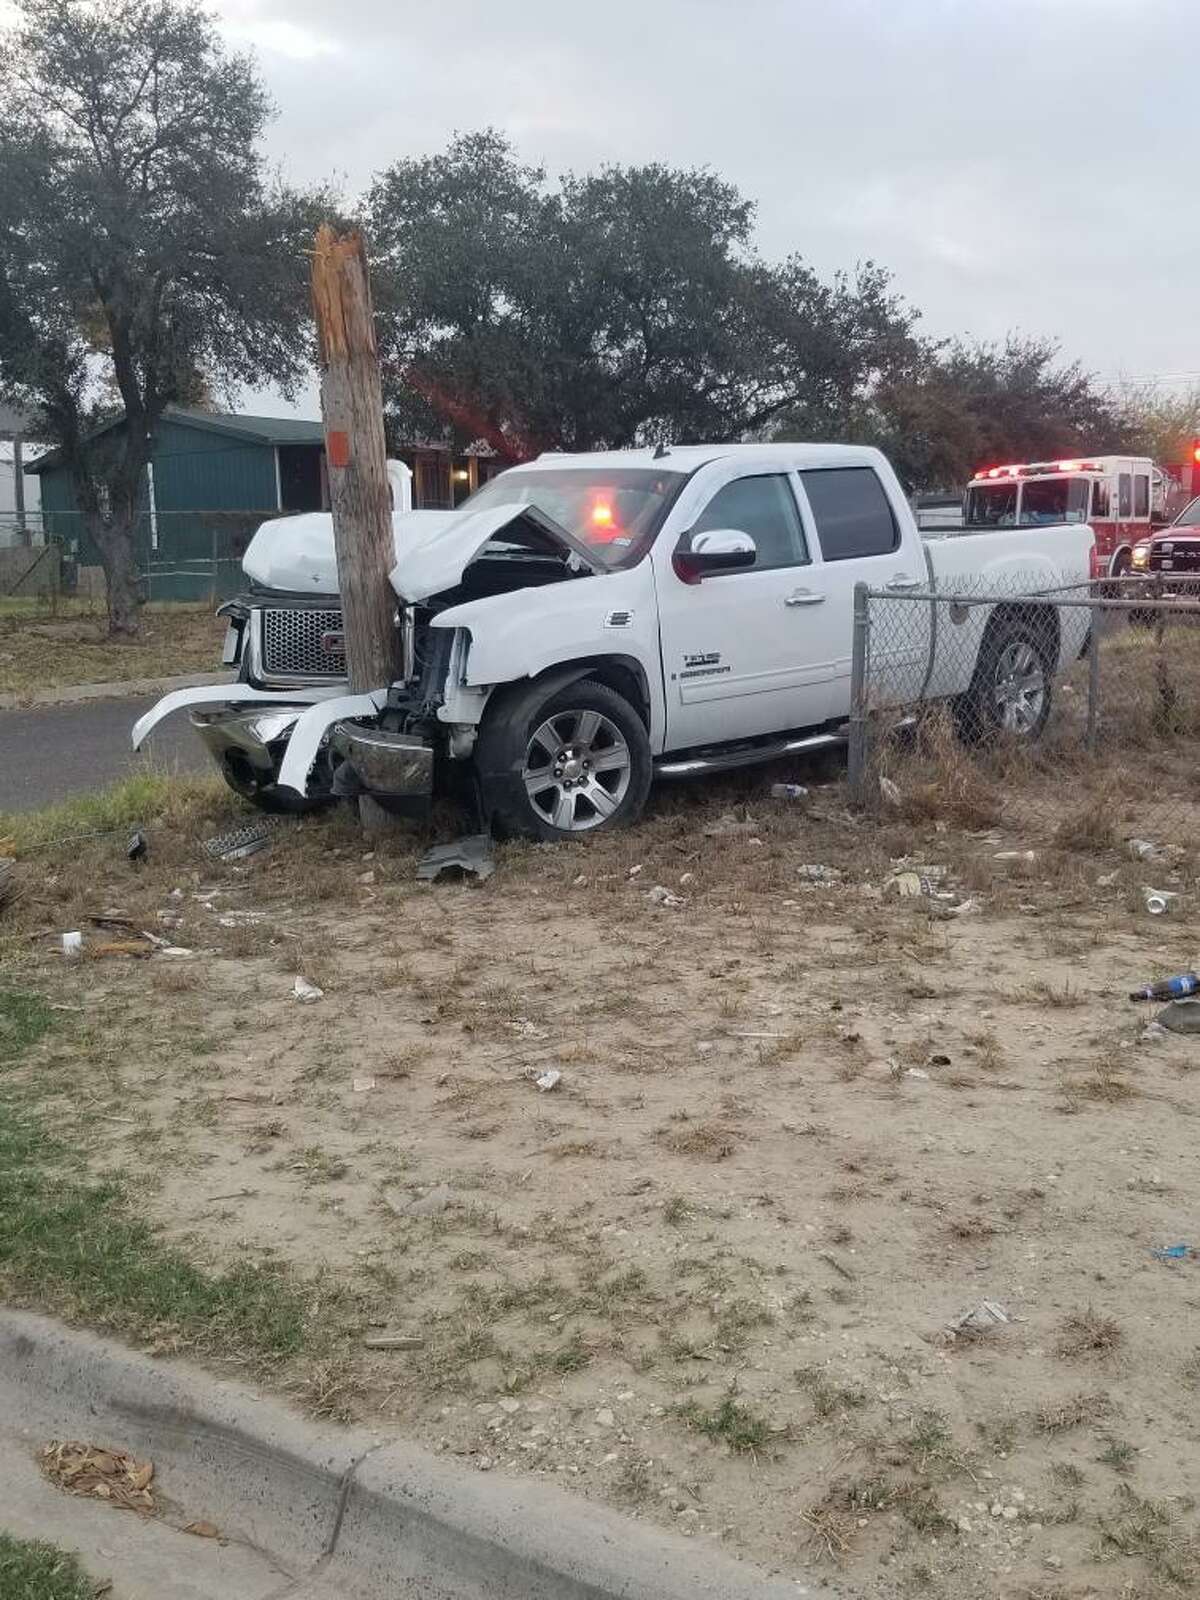 A GMC Sierra crashed into a utility pole early Friday in the intersection Pierce Street and Pinder Avenue. A male patient refused treatment or transportation to a local hospital.